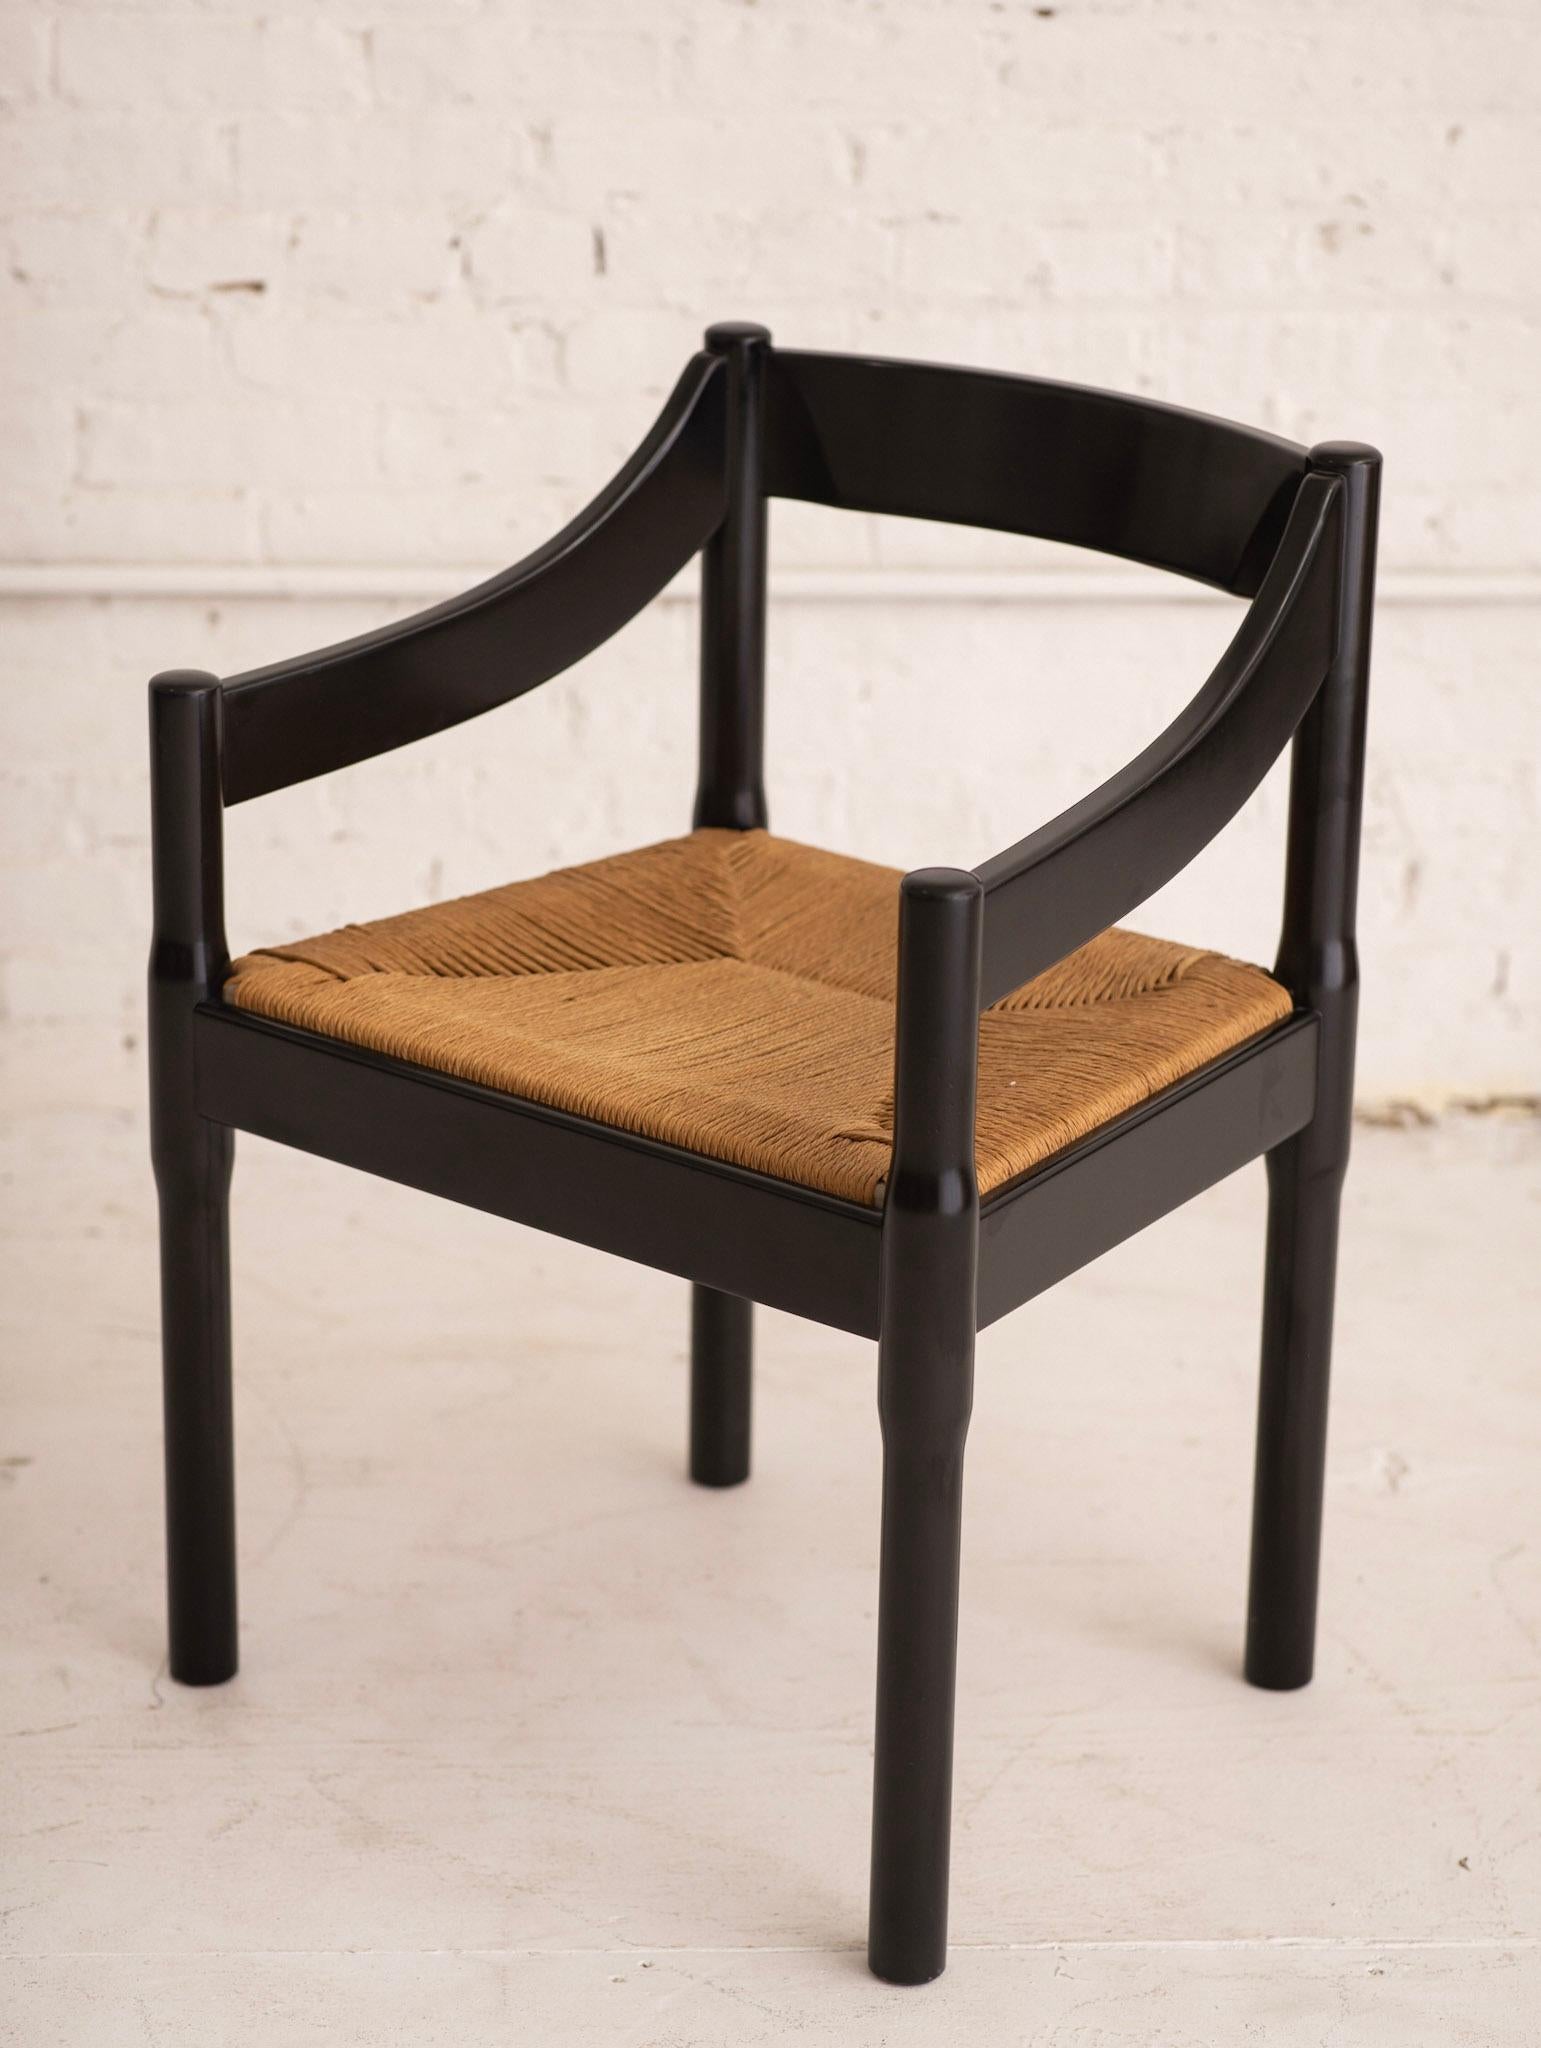 Vico Magistretti “Carimate” chair imported by Stendig. Ebonized wood finish with woven rush seating. Retains original Stendig sticker.